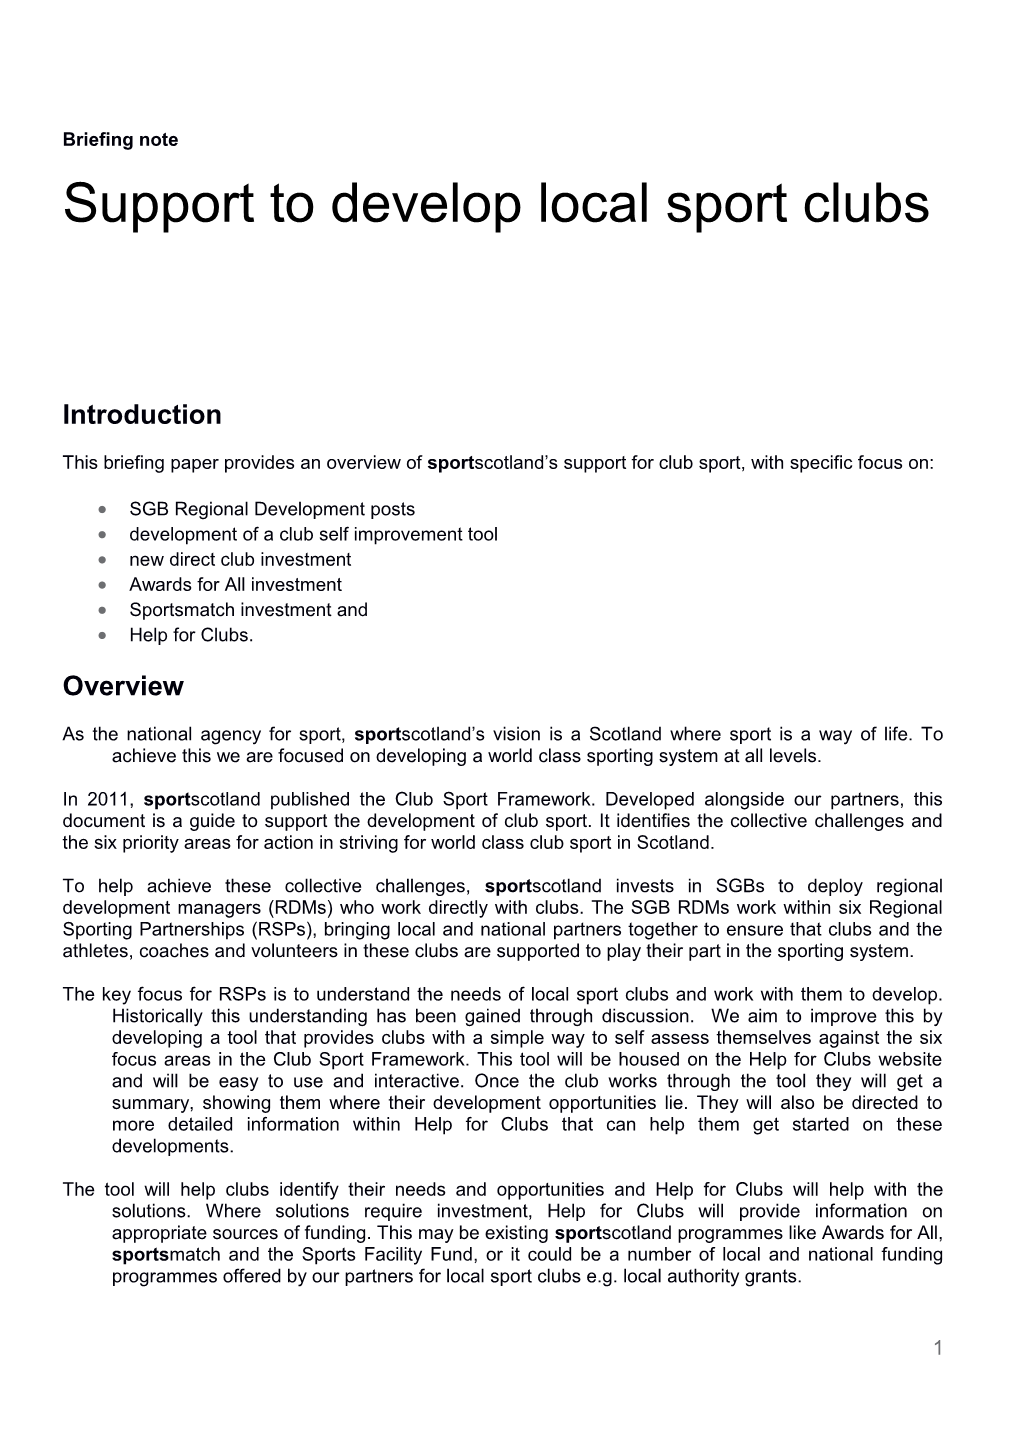 Support to Develop Local Sport Clubs